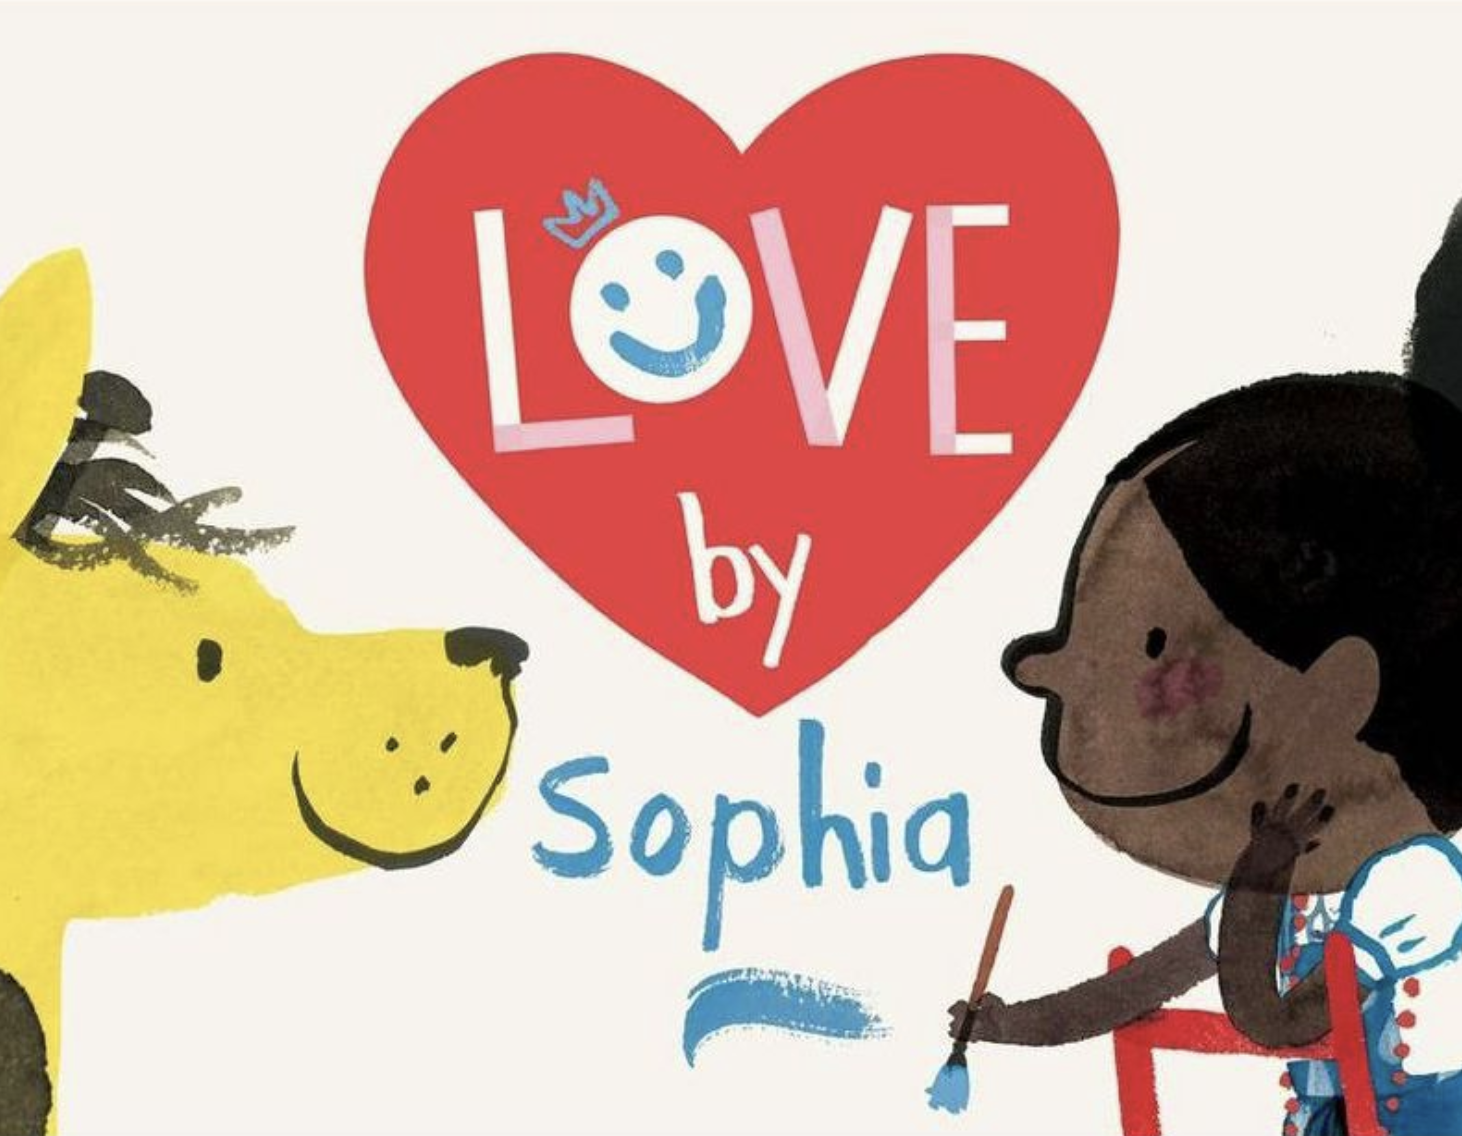 Image for "Love by Sophia"